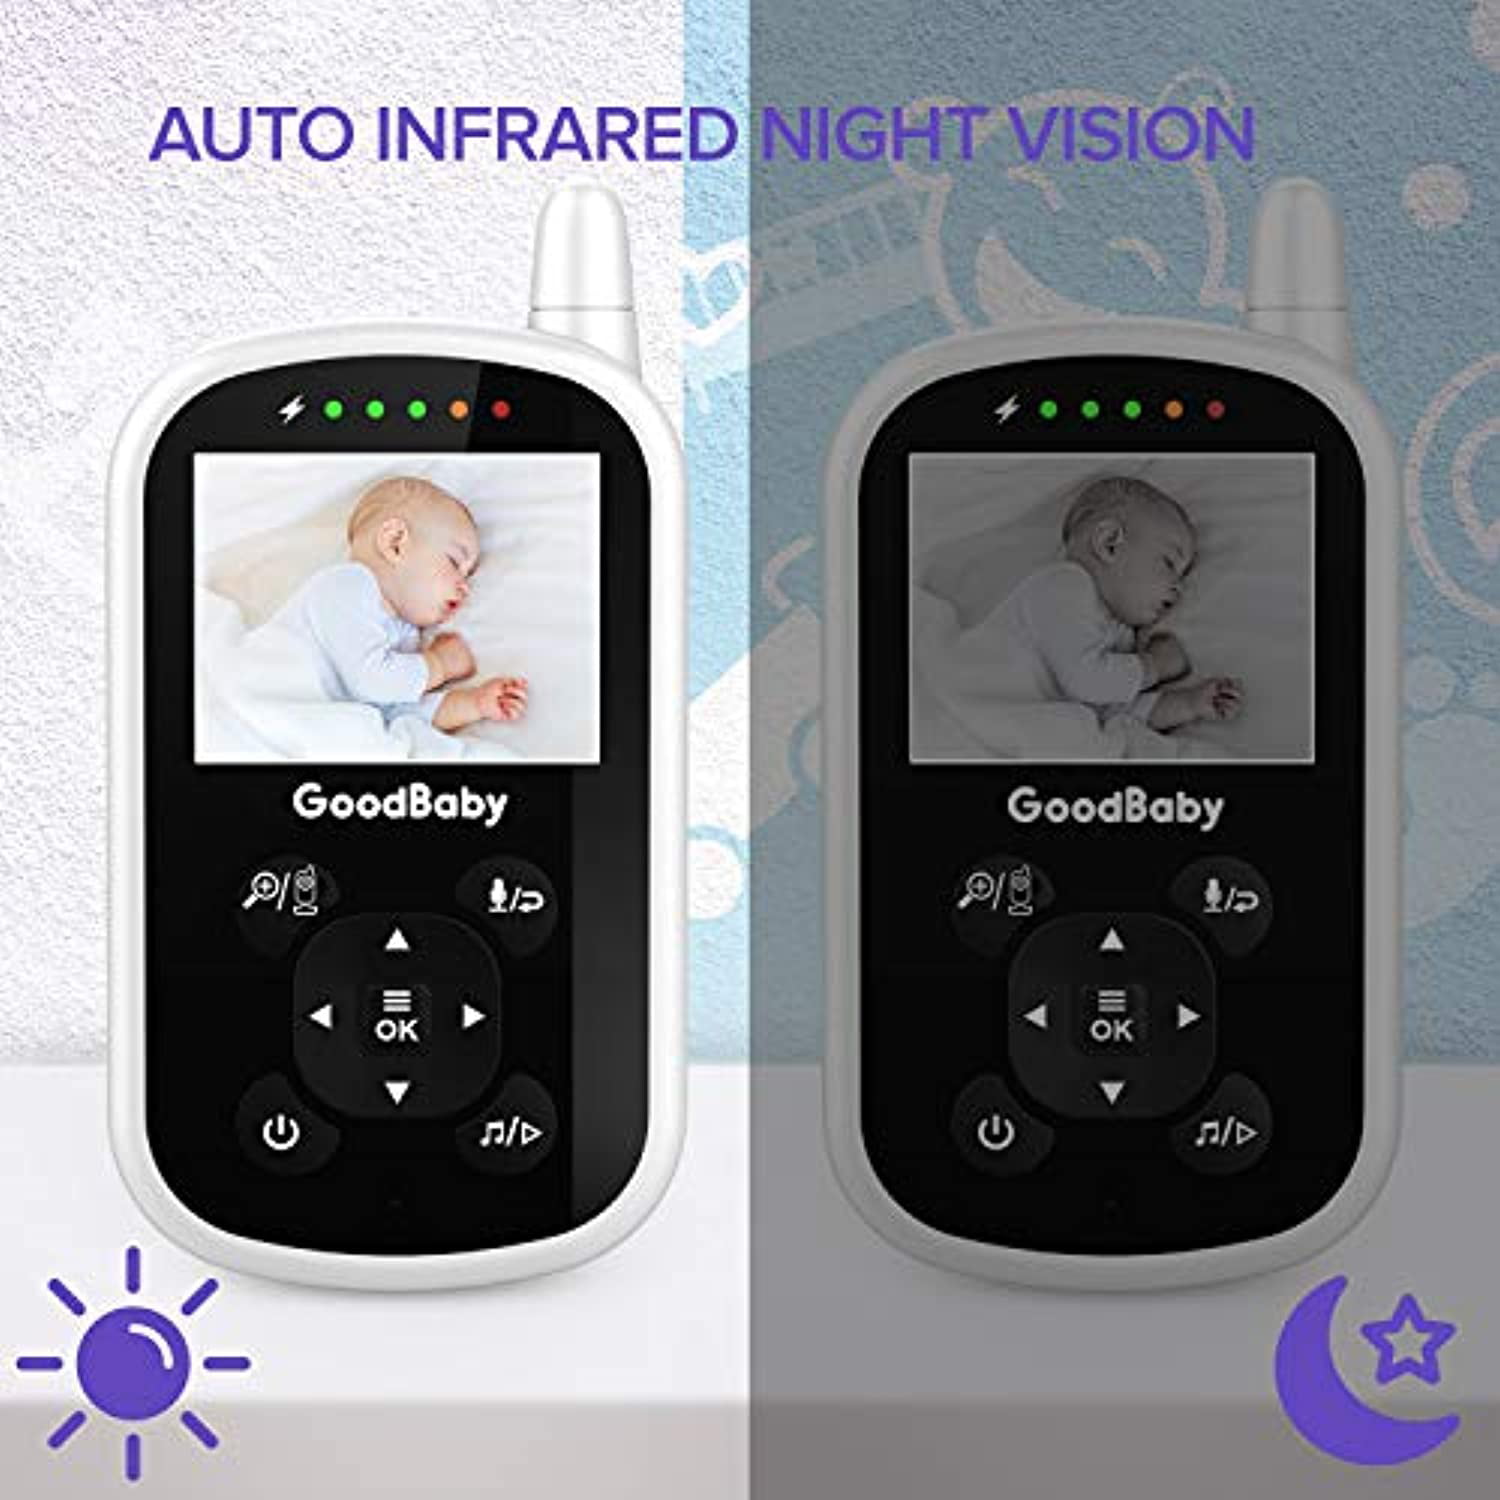 Goodbaby Video Monitor with Camera and Audio, Auto Night Vision, Two-Way Temperature Monitor, VOX Mode, Lullabies, 960ft Range and Long Battery Life -